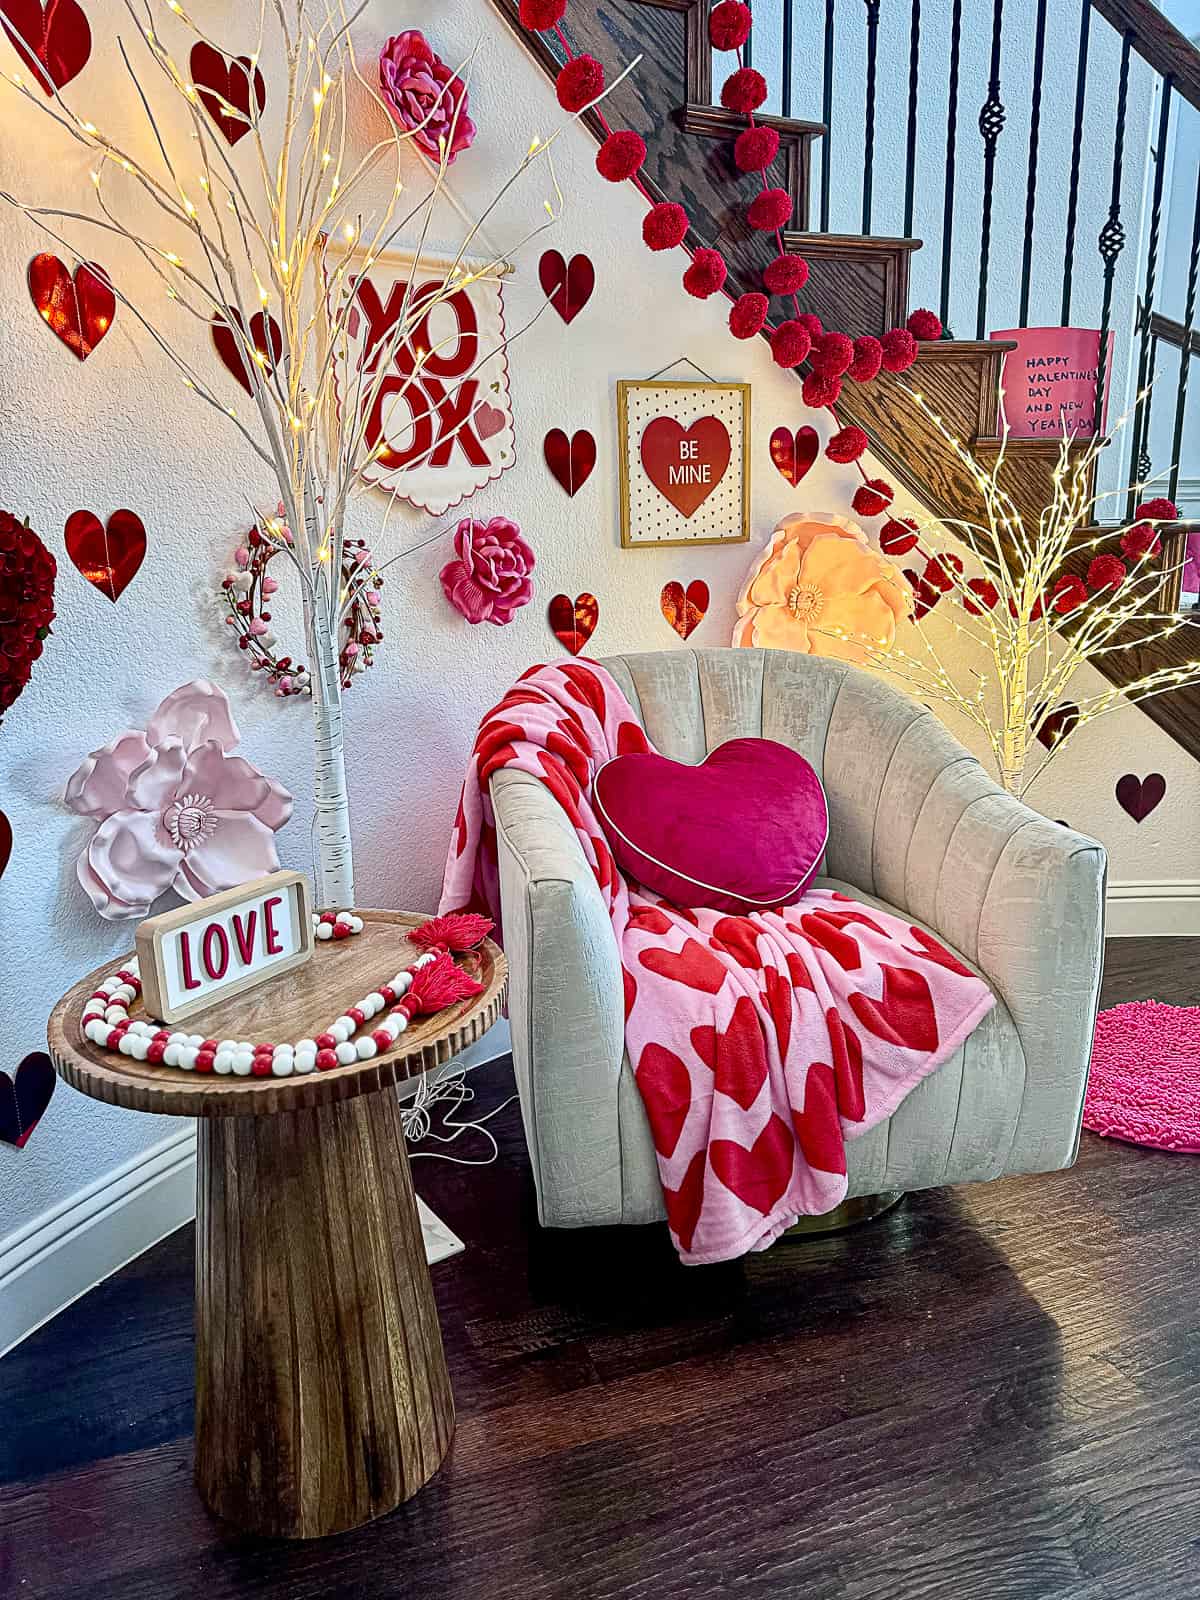 Valentine's Day Heart Shaped Pillow and Blanket on a ChairSipBiteGo